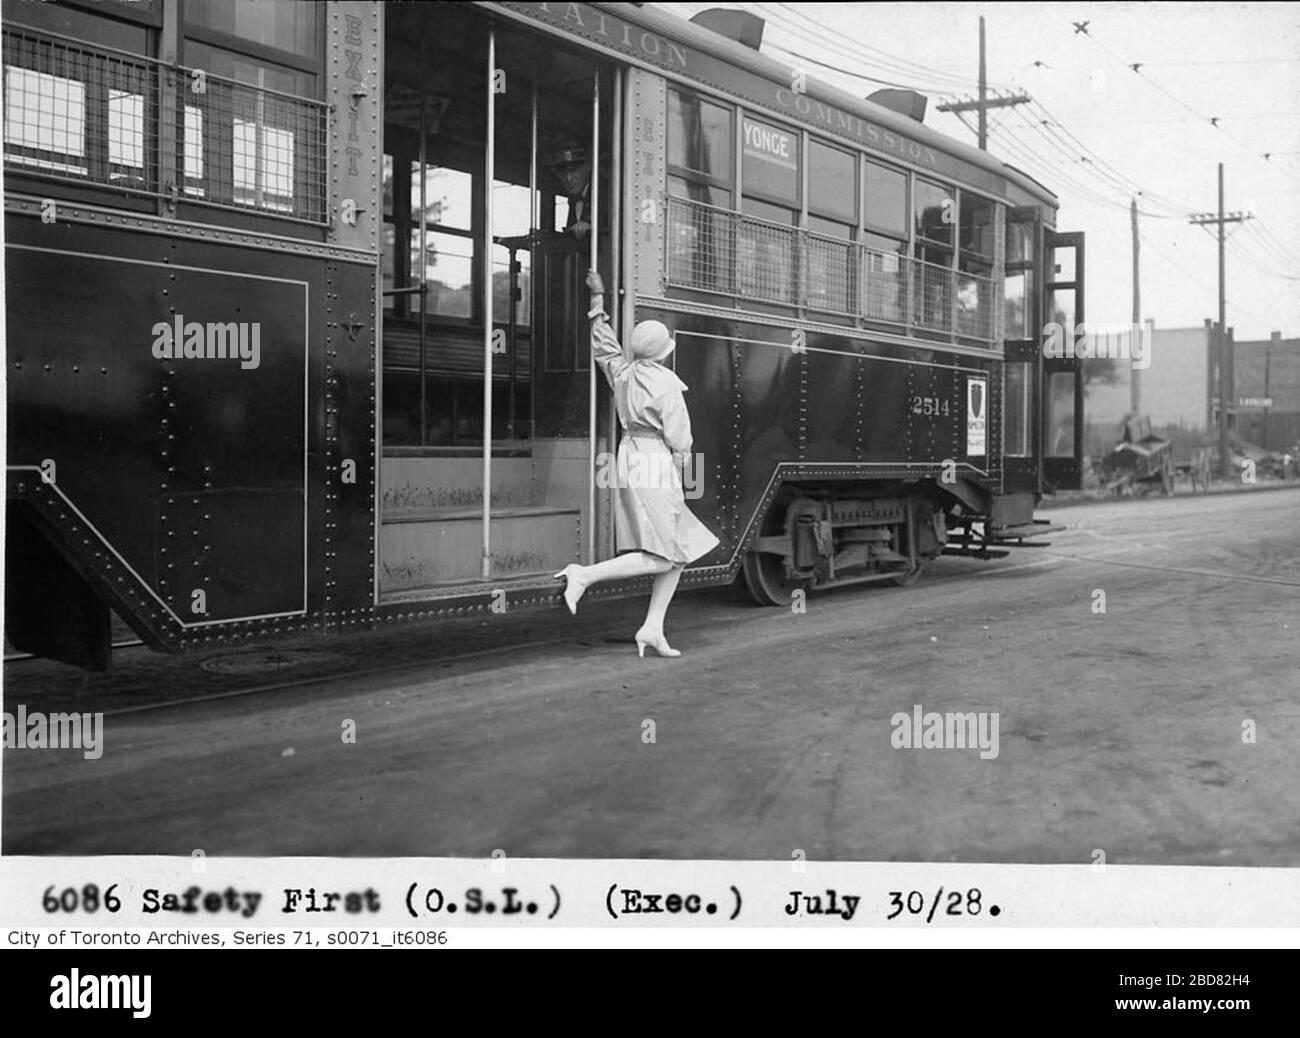 Well dressed woman dismounts from a Peter Witt streetcar in 1928  Photographer: Alfred Pearson July 30, 1928 City of Toronto Archives This  image is available from the City of Toronto Archives, listed